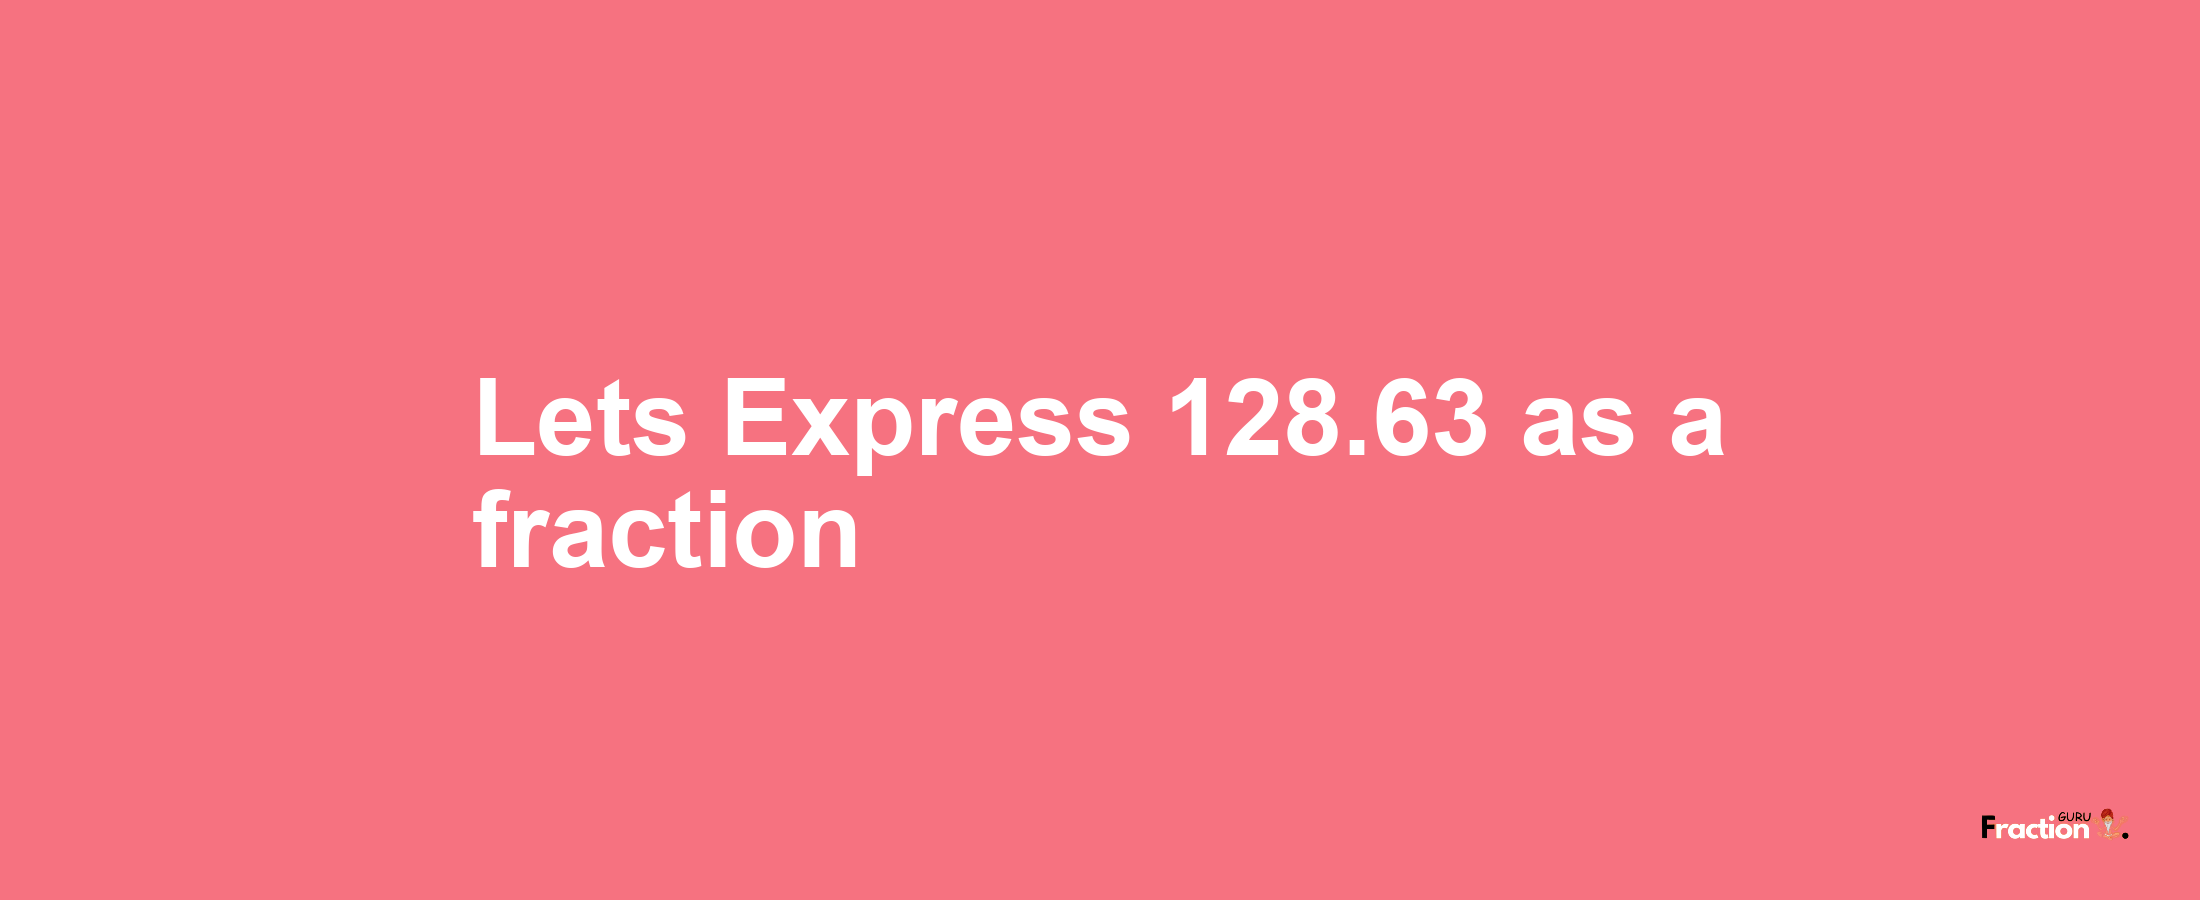 Lets Express 128.63 as afraction